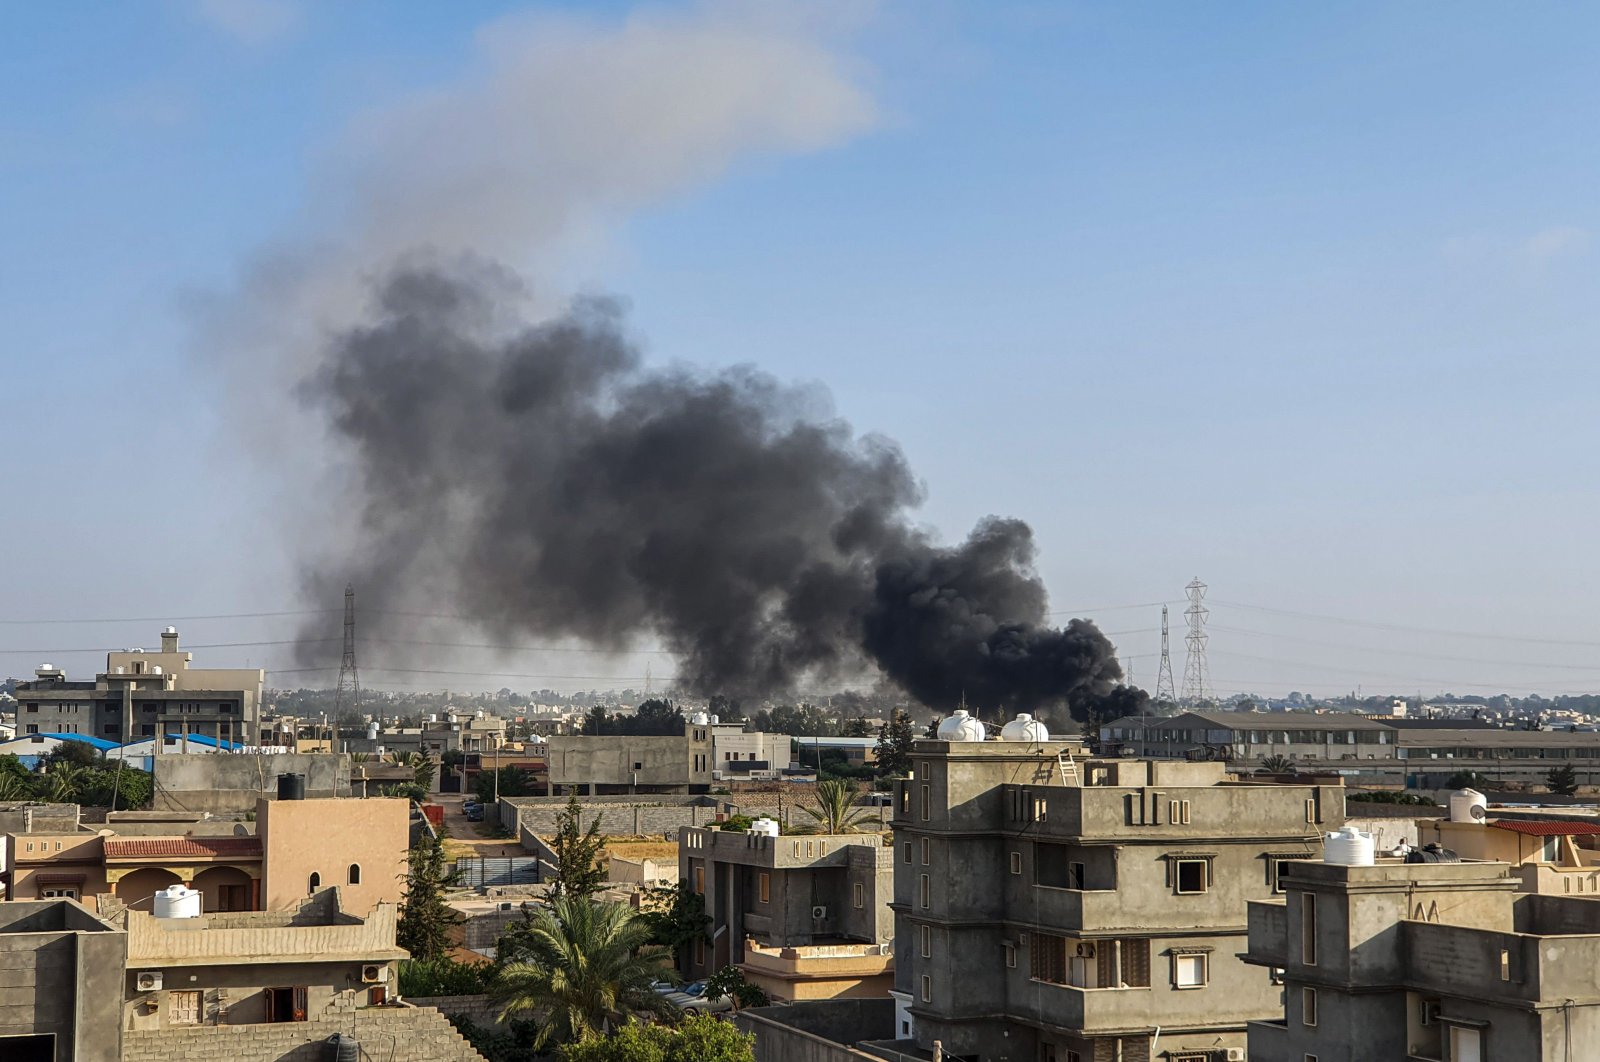 Smoke plumes rise following a reported airstrike by forces loyal to putschist Gen. Khalifa Haftar in Tajoura, south of the capital Tripoli, Libya, June 29, 2019. (AFP File Photo)